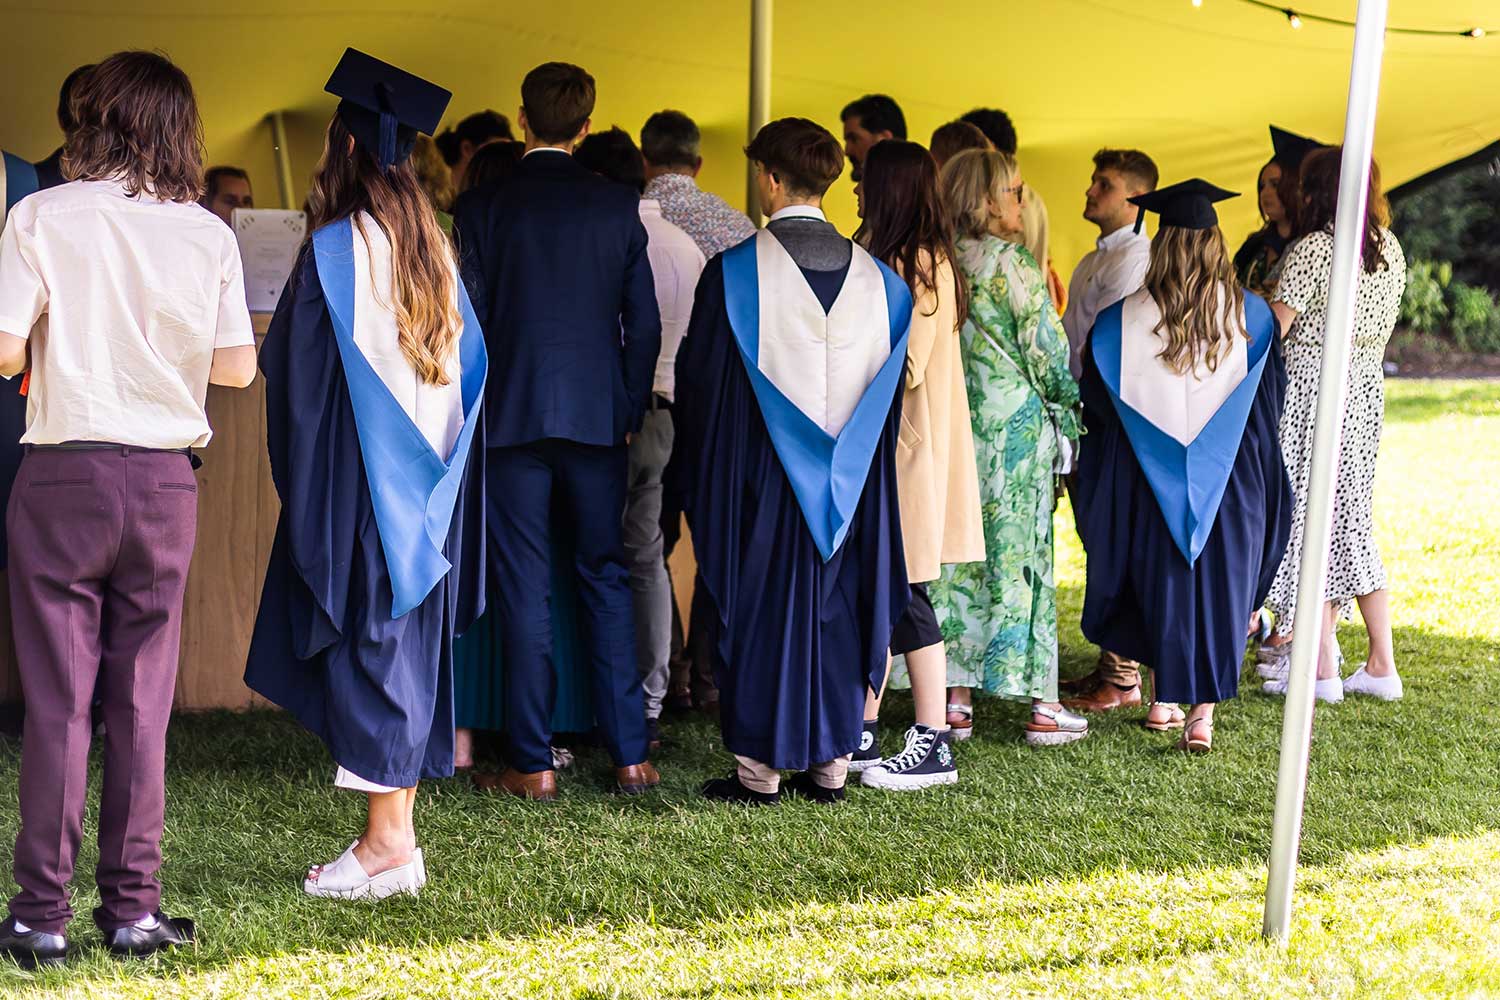 Graduates and their guests line up at a bar inside a marquee